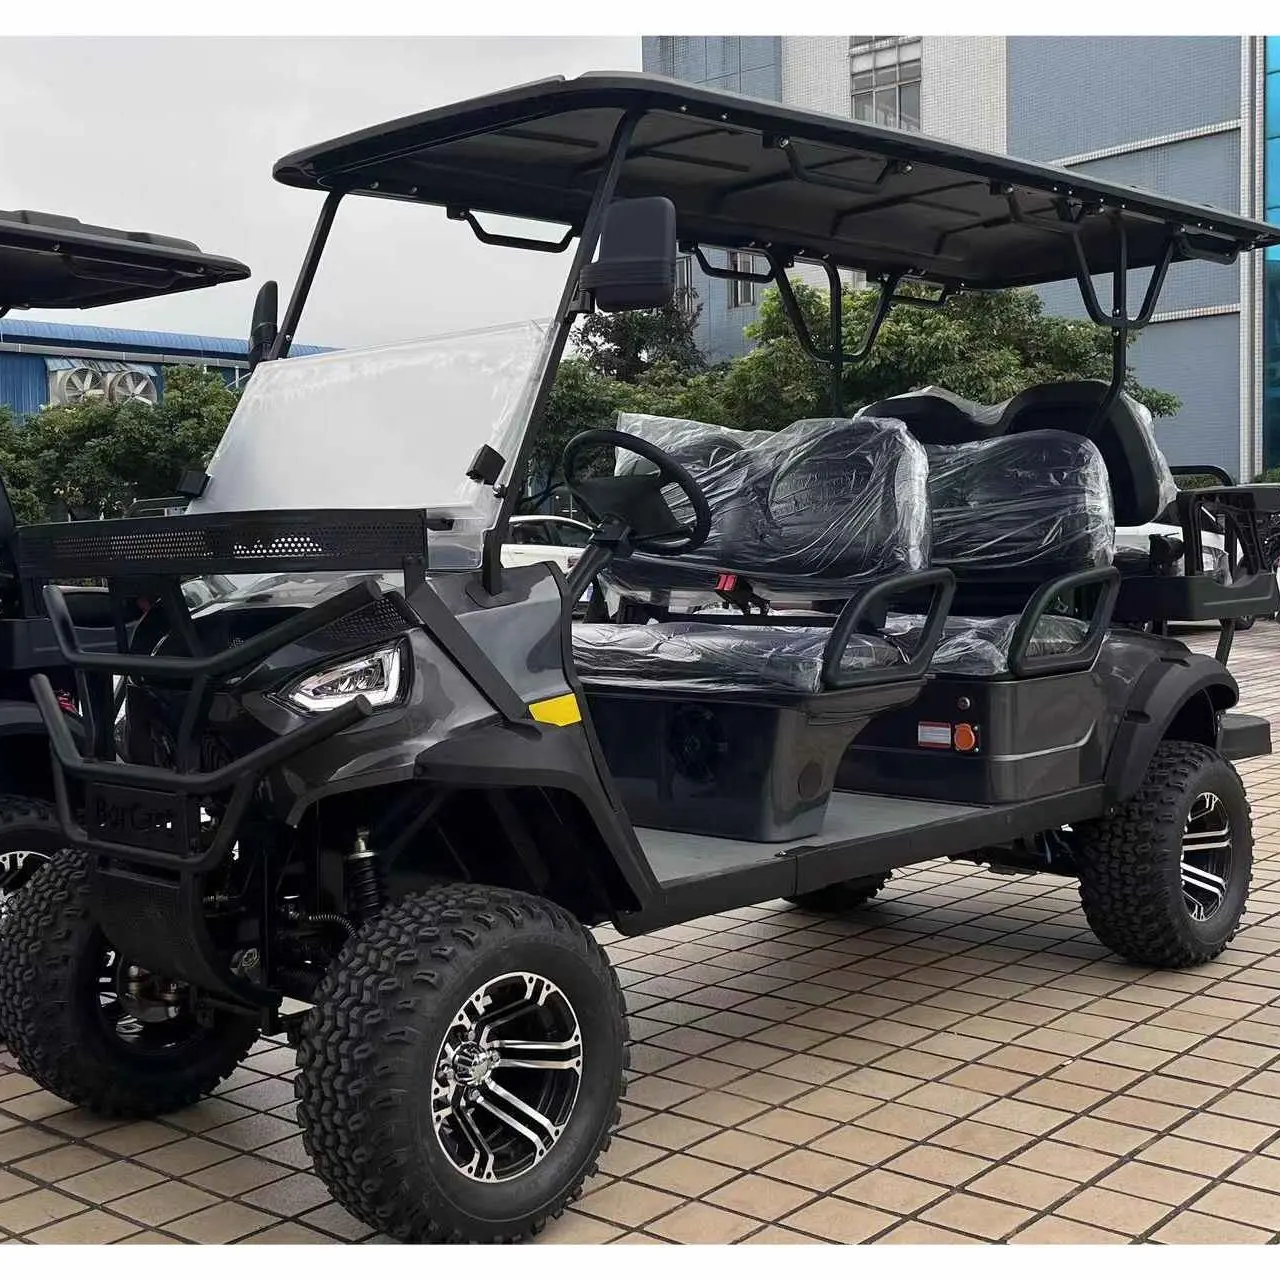 Custom Golf Cart 6 Seater Lifted Golf Carts Electric Four Disc Brake System Independent Suspension Hunting Cart